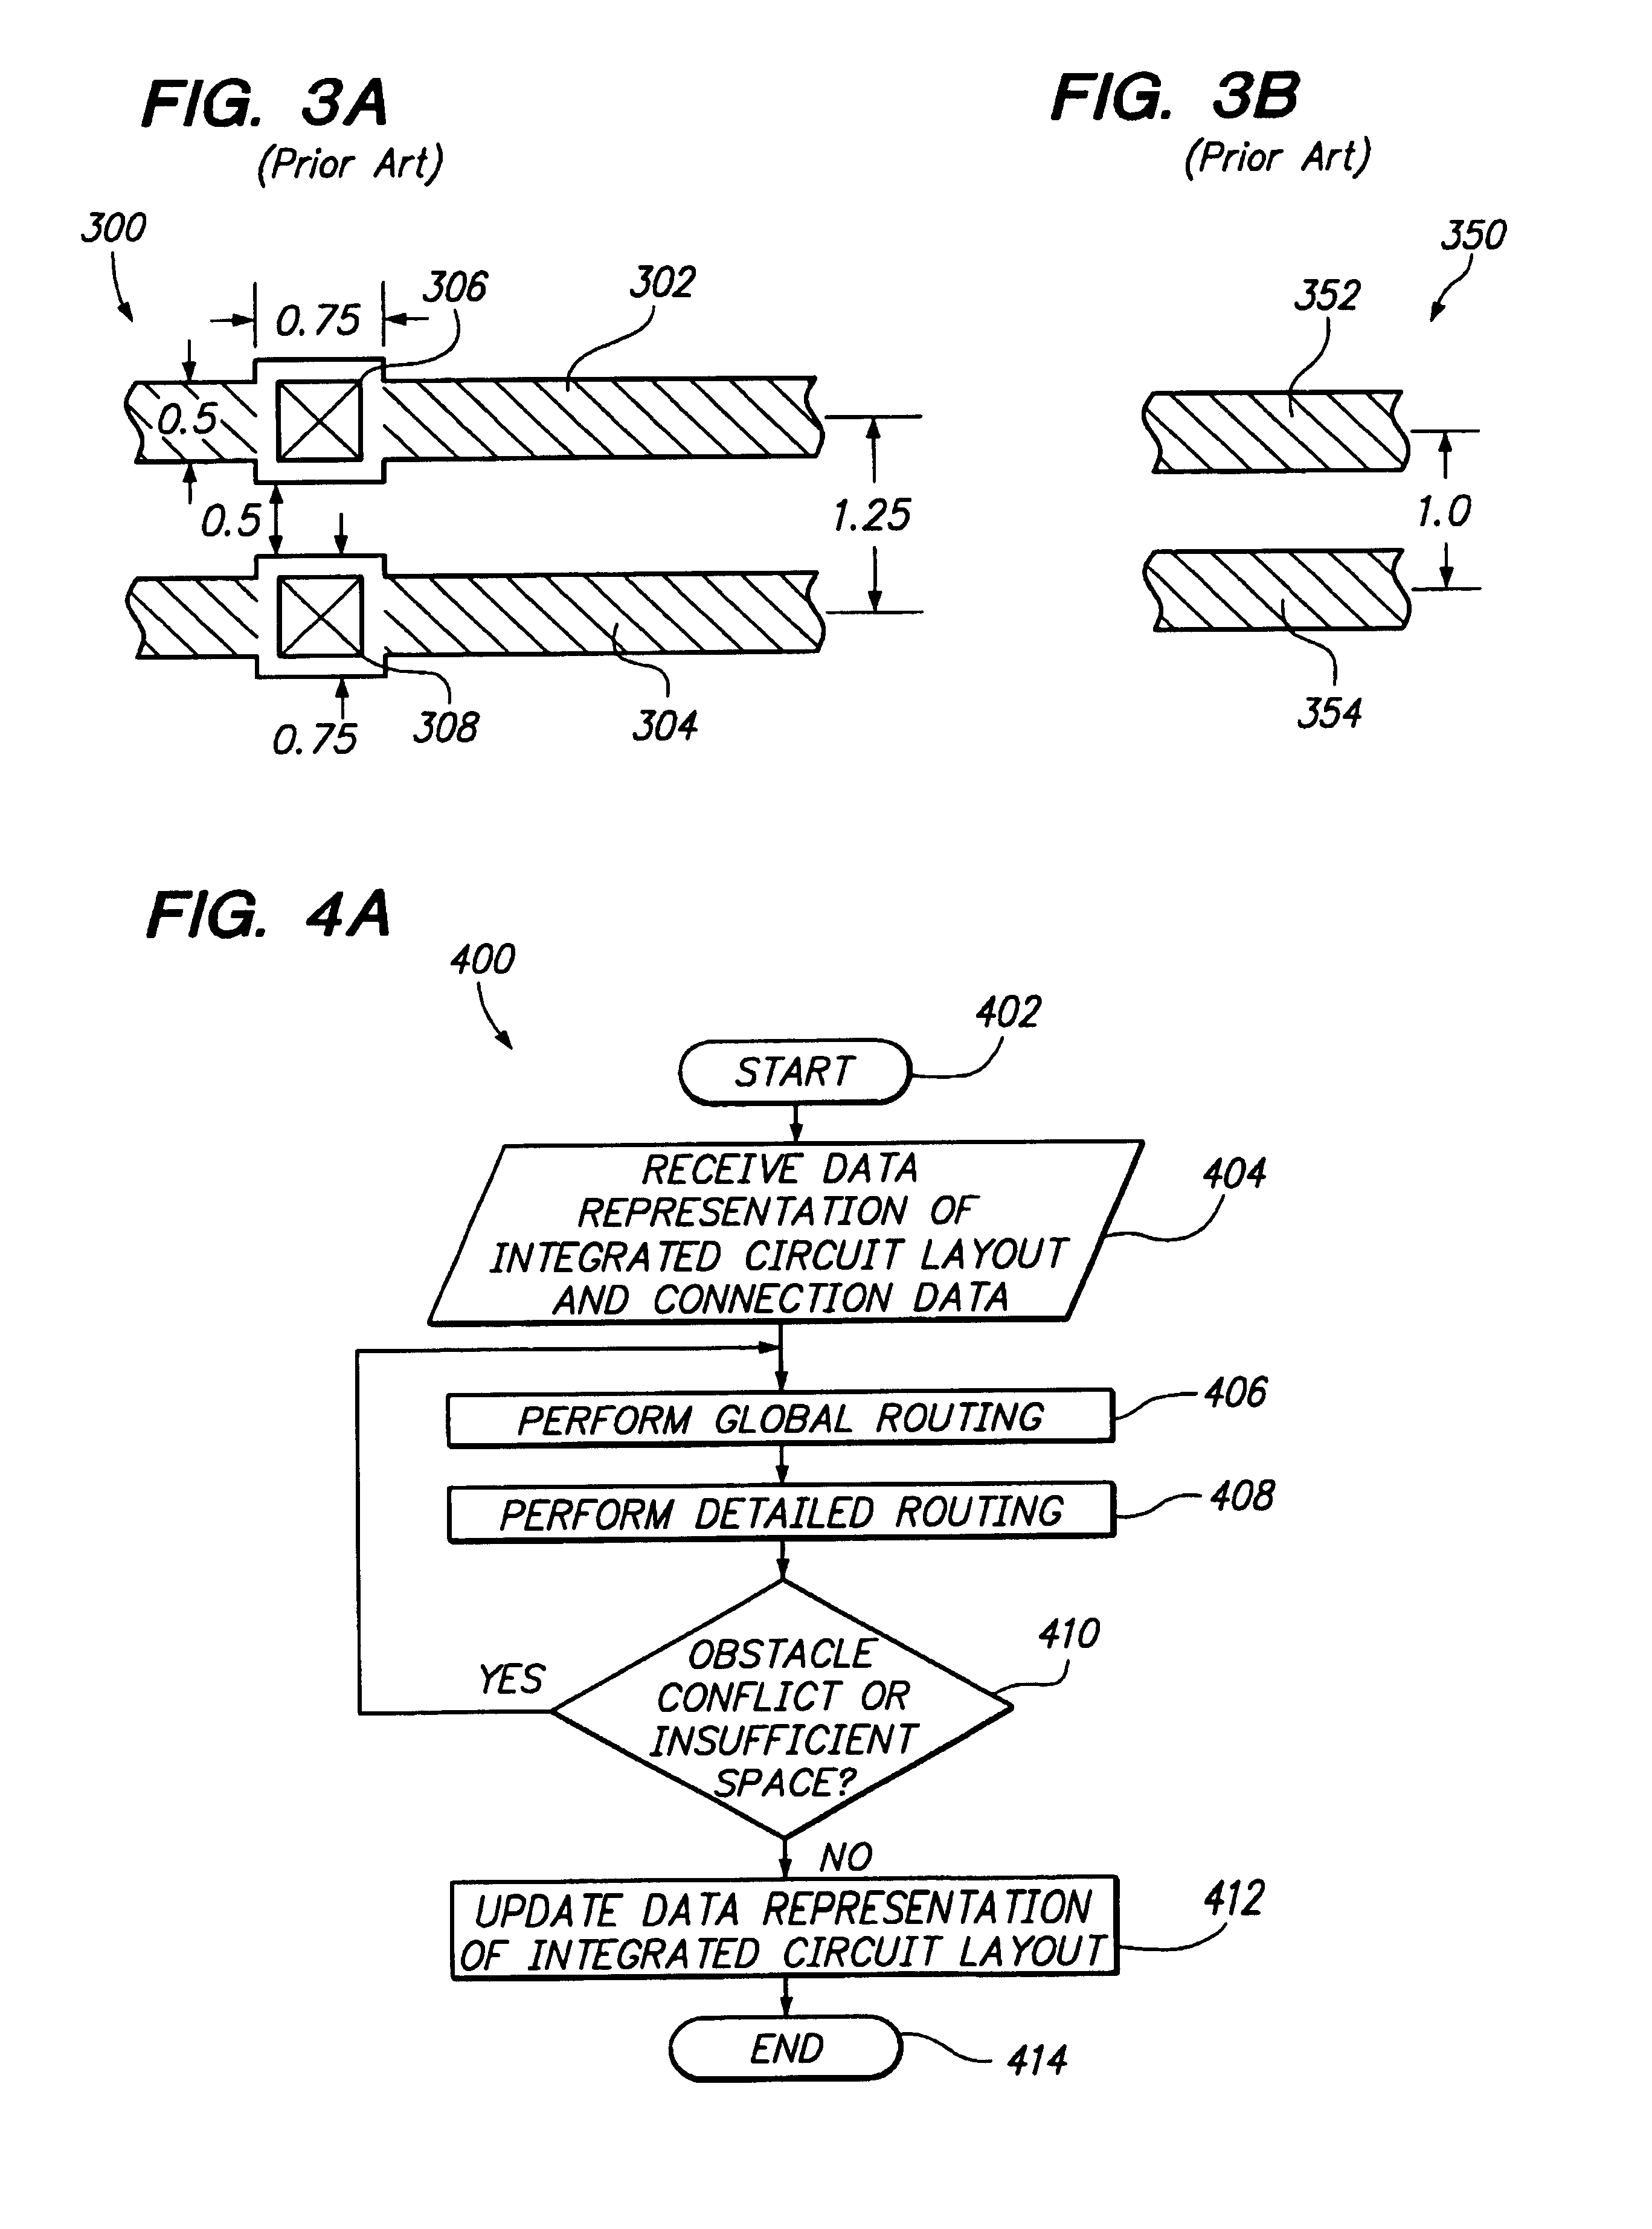 Approach for routing an integrated circuit